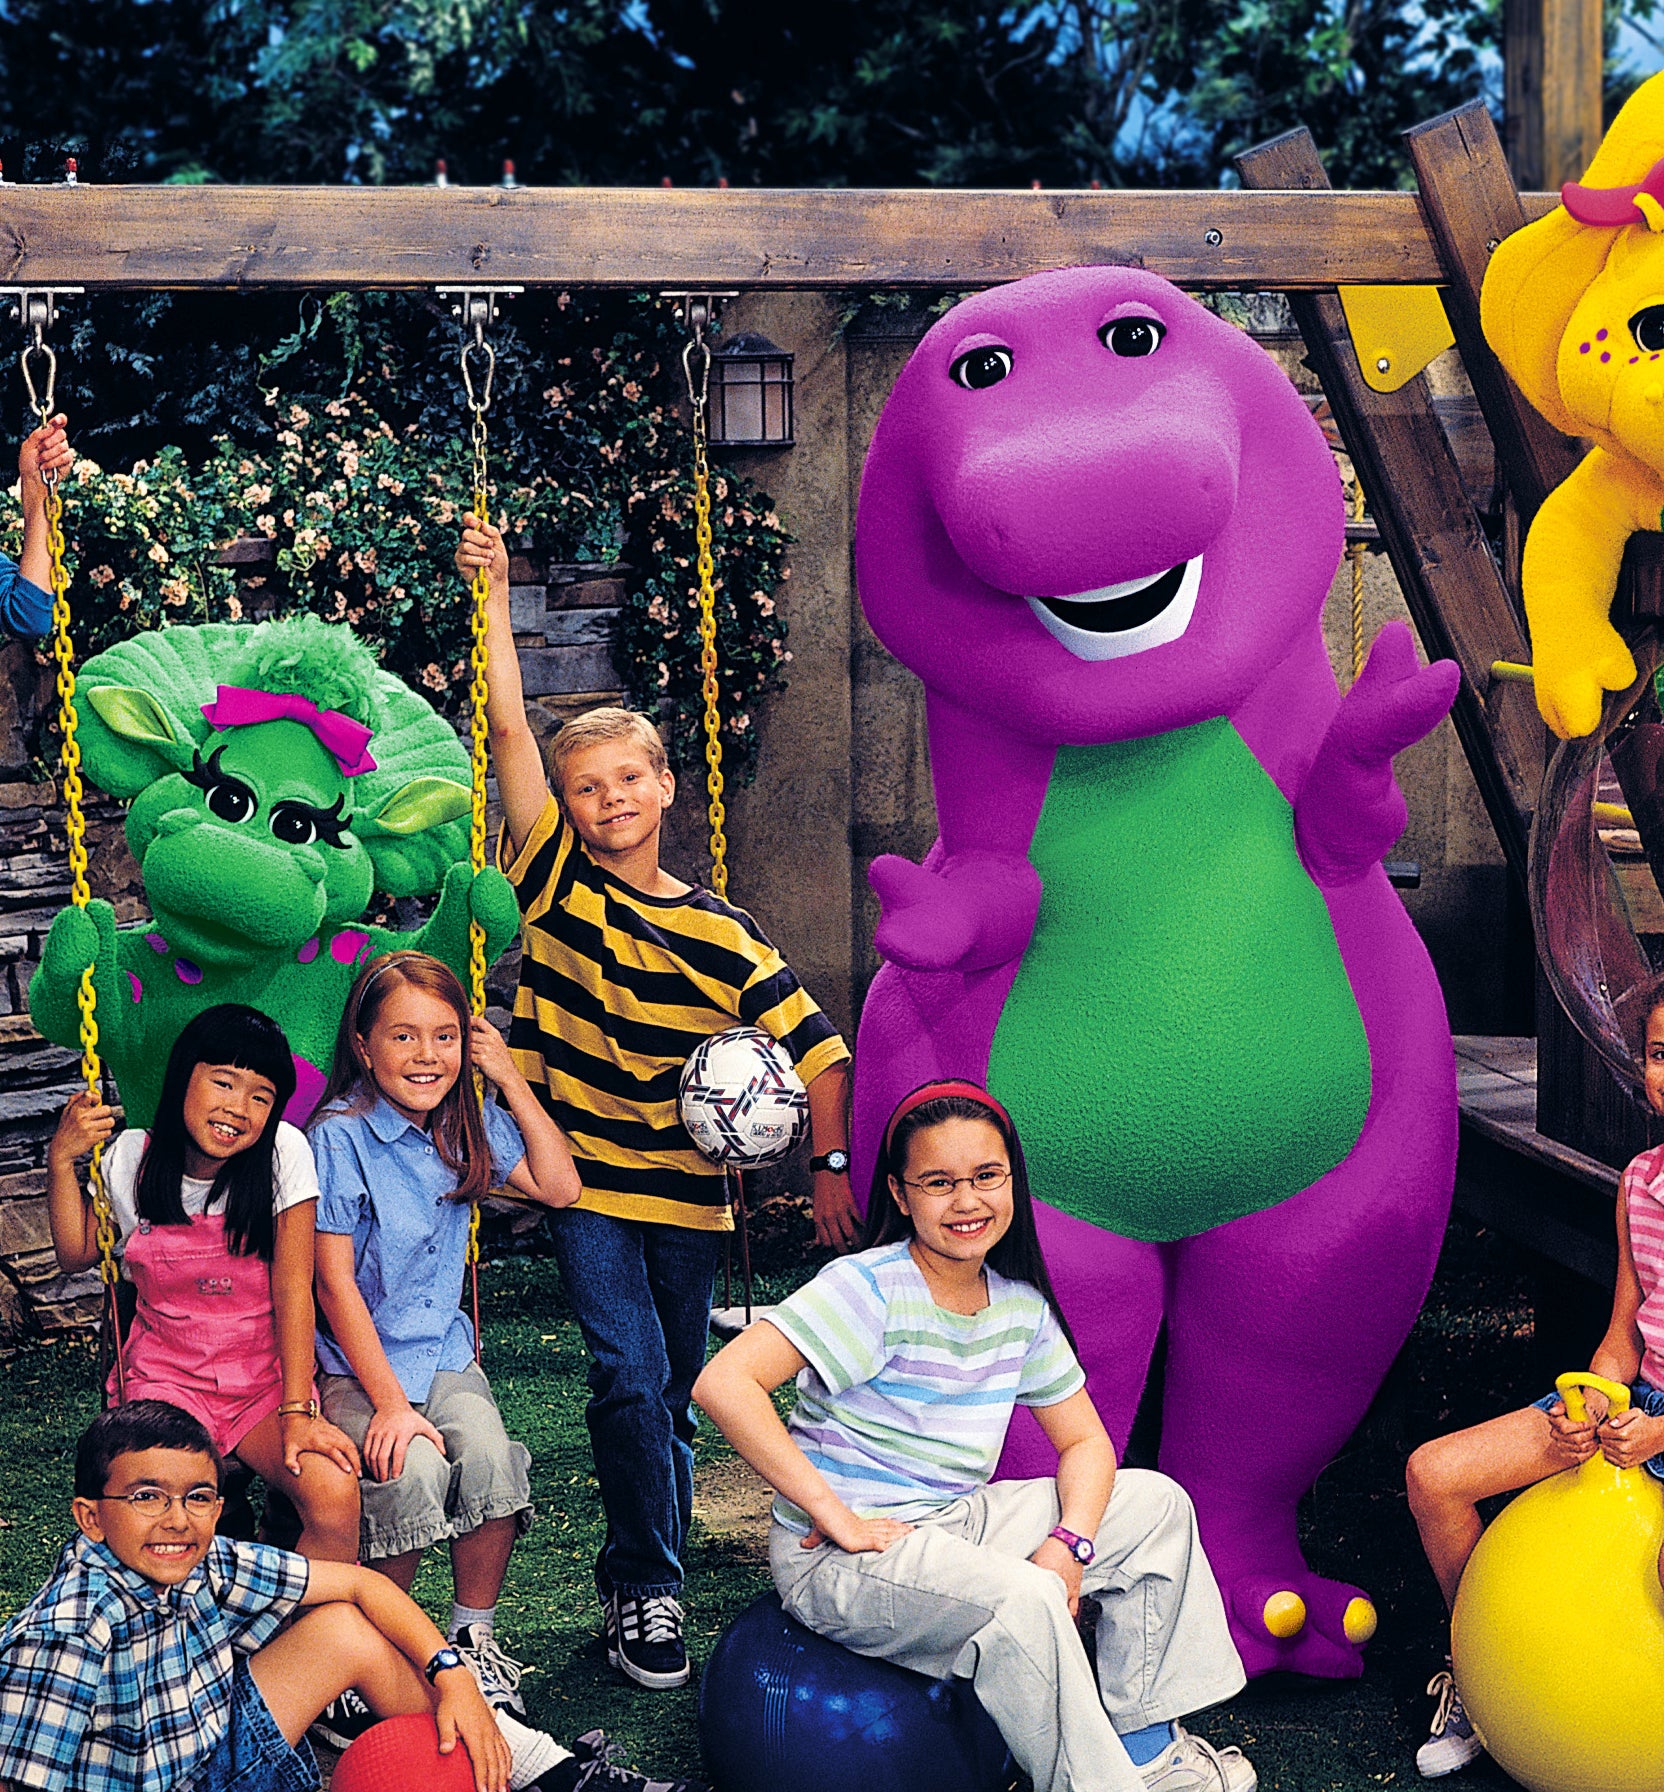 Group of children posing with Barney the Dinosaur and friends BJ and Baby Bop on a playground